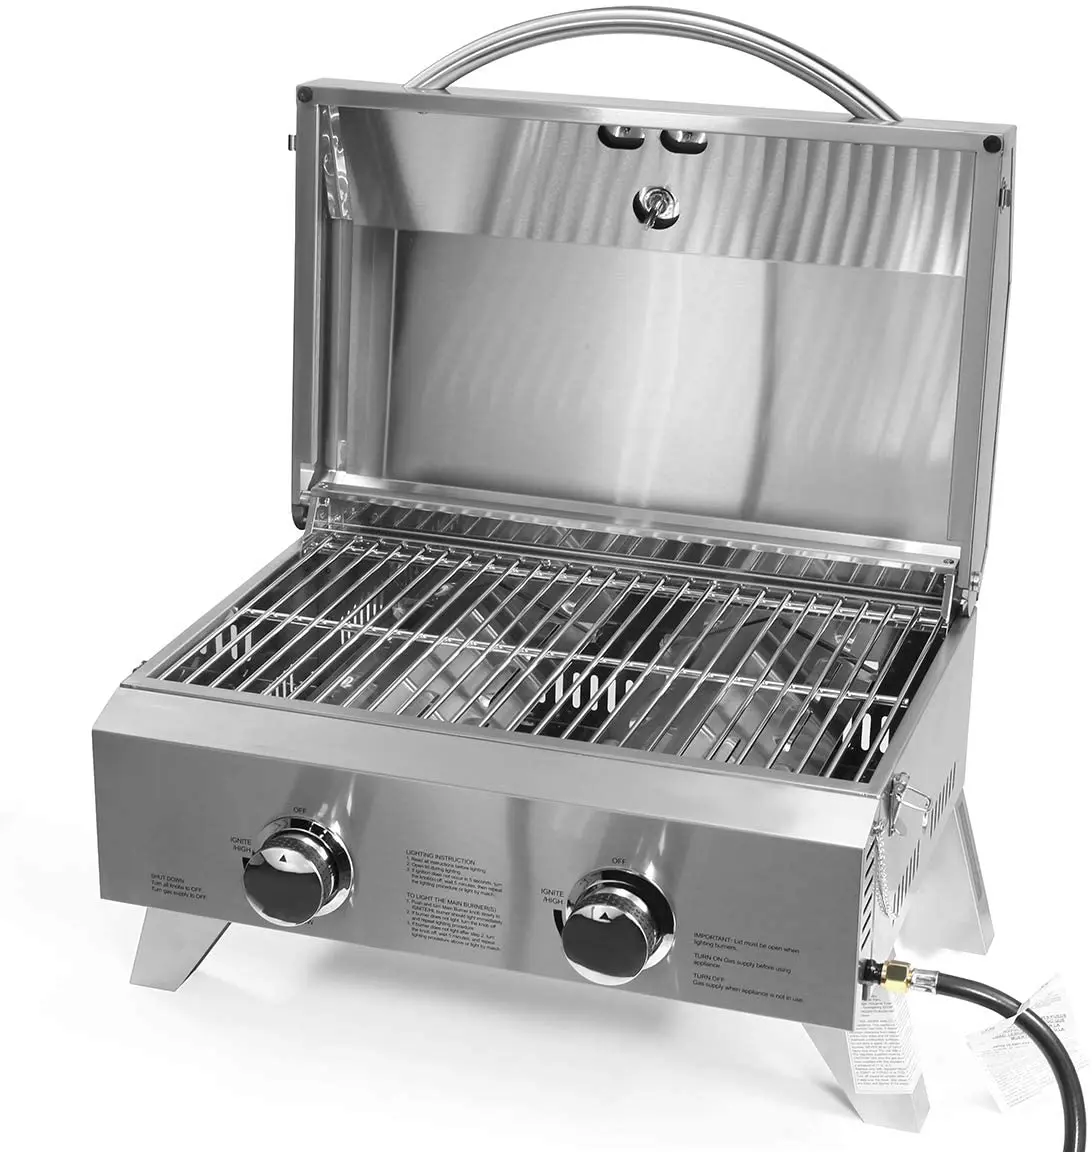 

Tabletop Propane Grill 2-Burner Portable Camping Gas Grill Stainless Steel for Outdoor Cooking Patio Garden BBQ Picnic